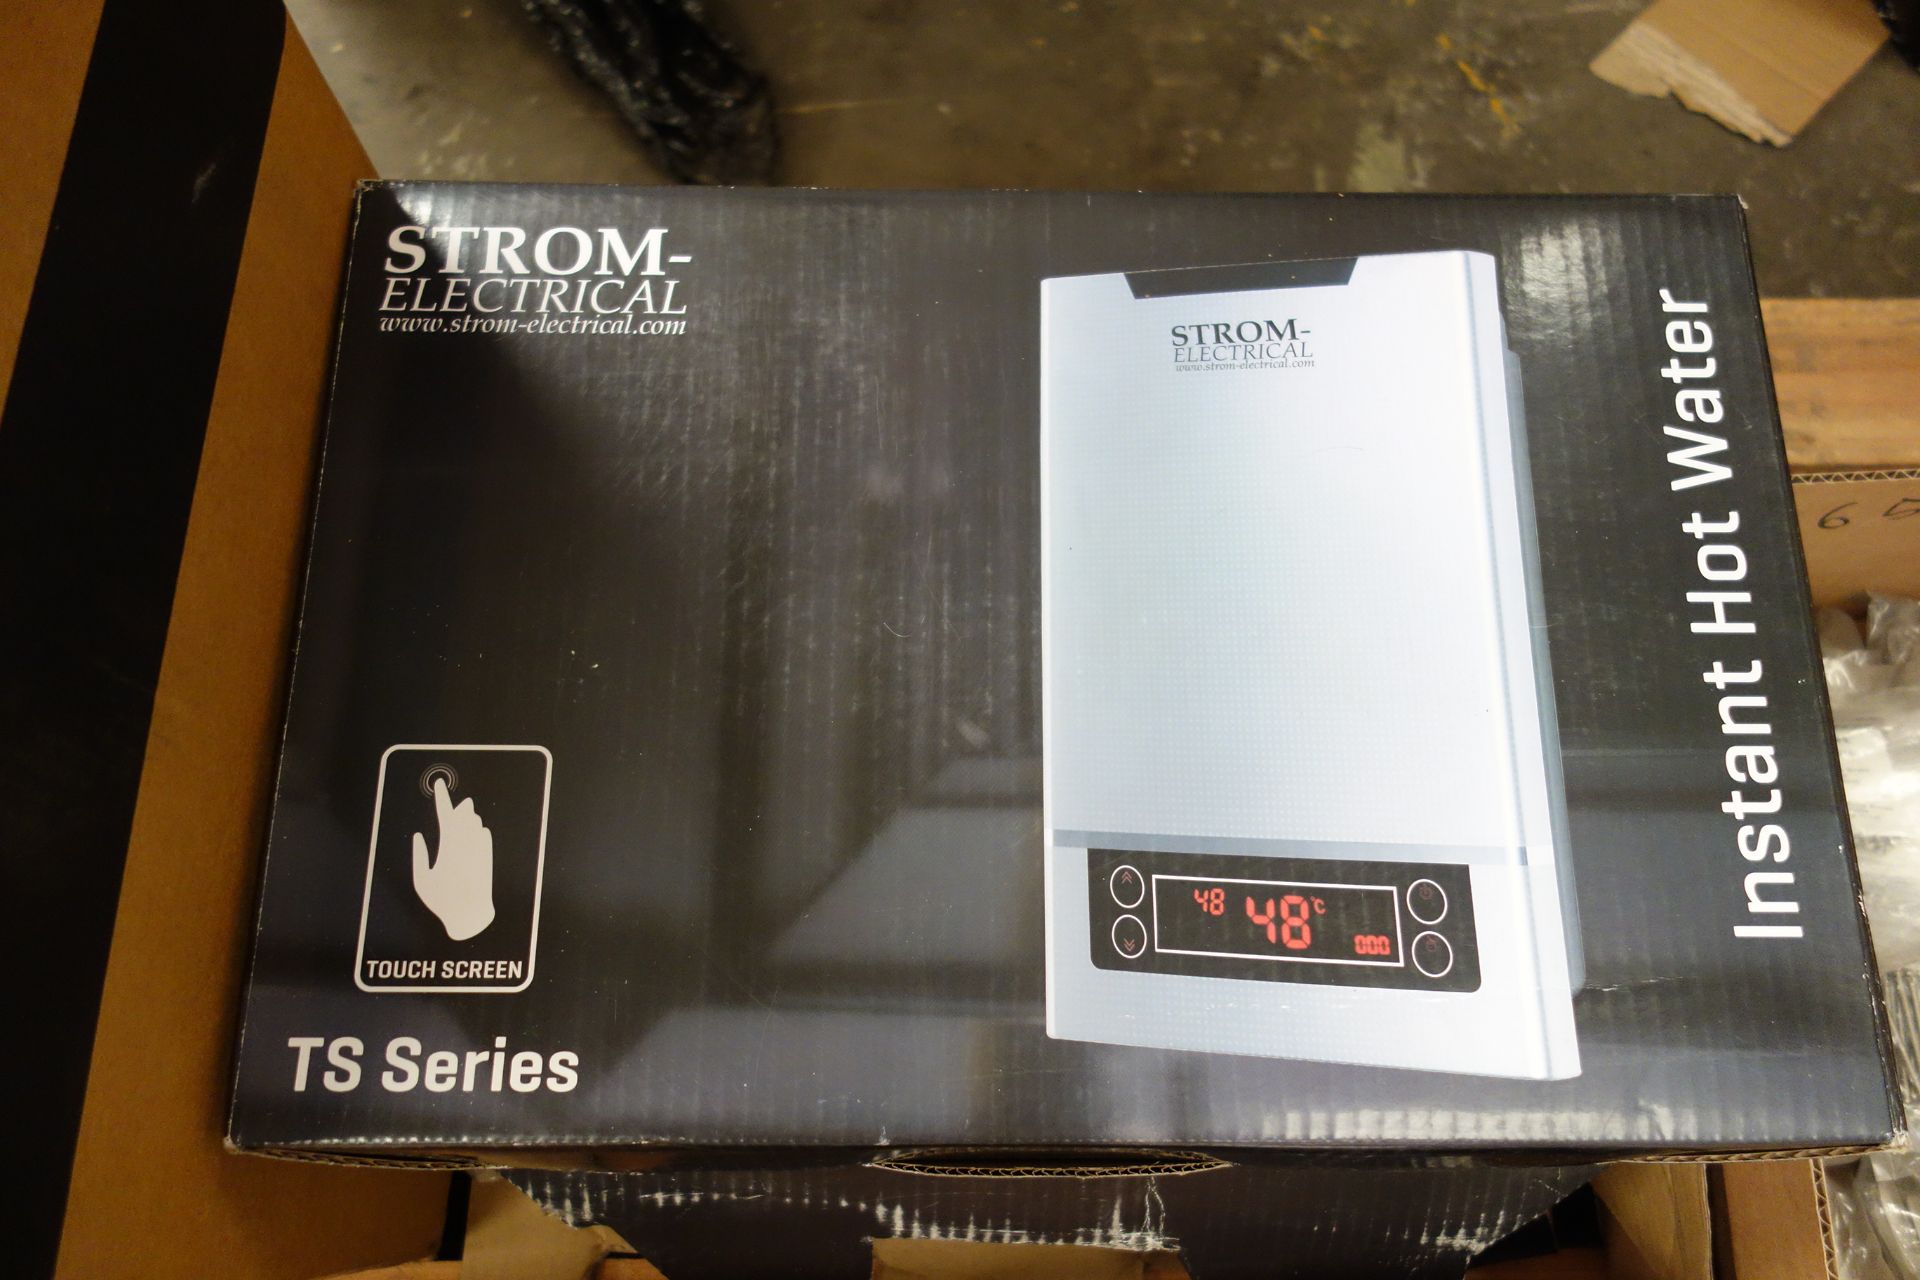 1 X Strom Electrical SEIHIIKTS1 1100W Instant Hot Water Heater TS Series Touch Screen